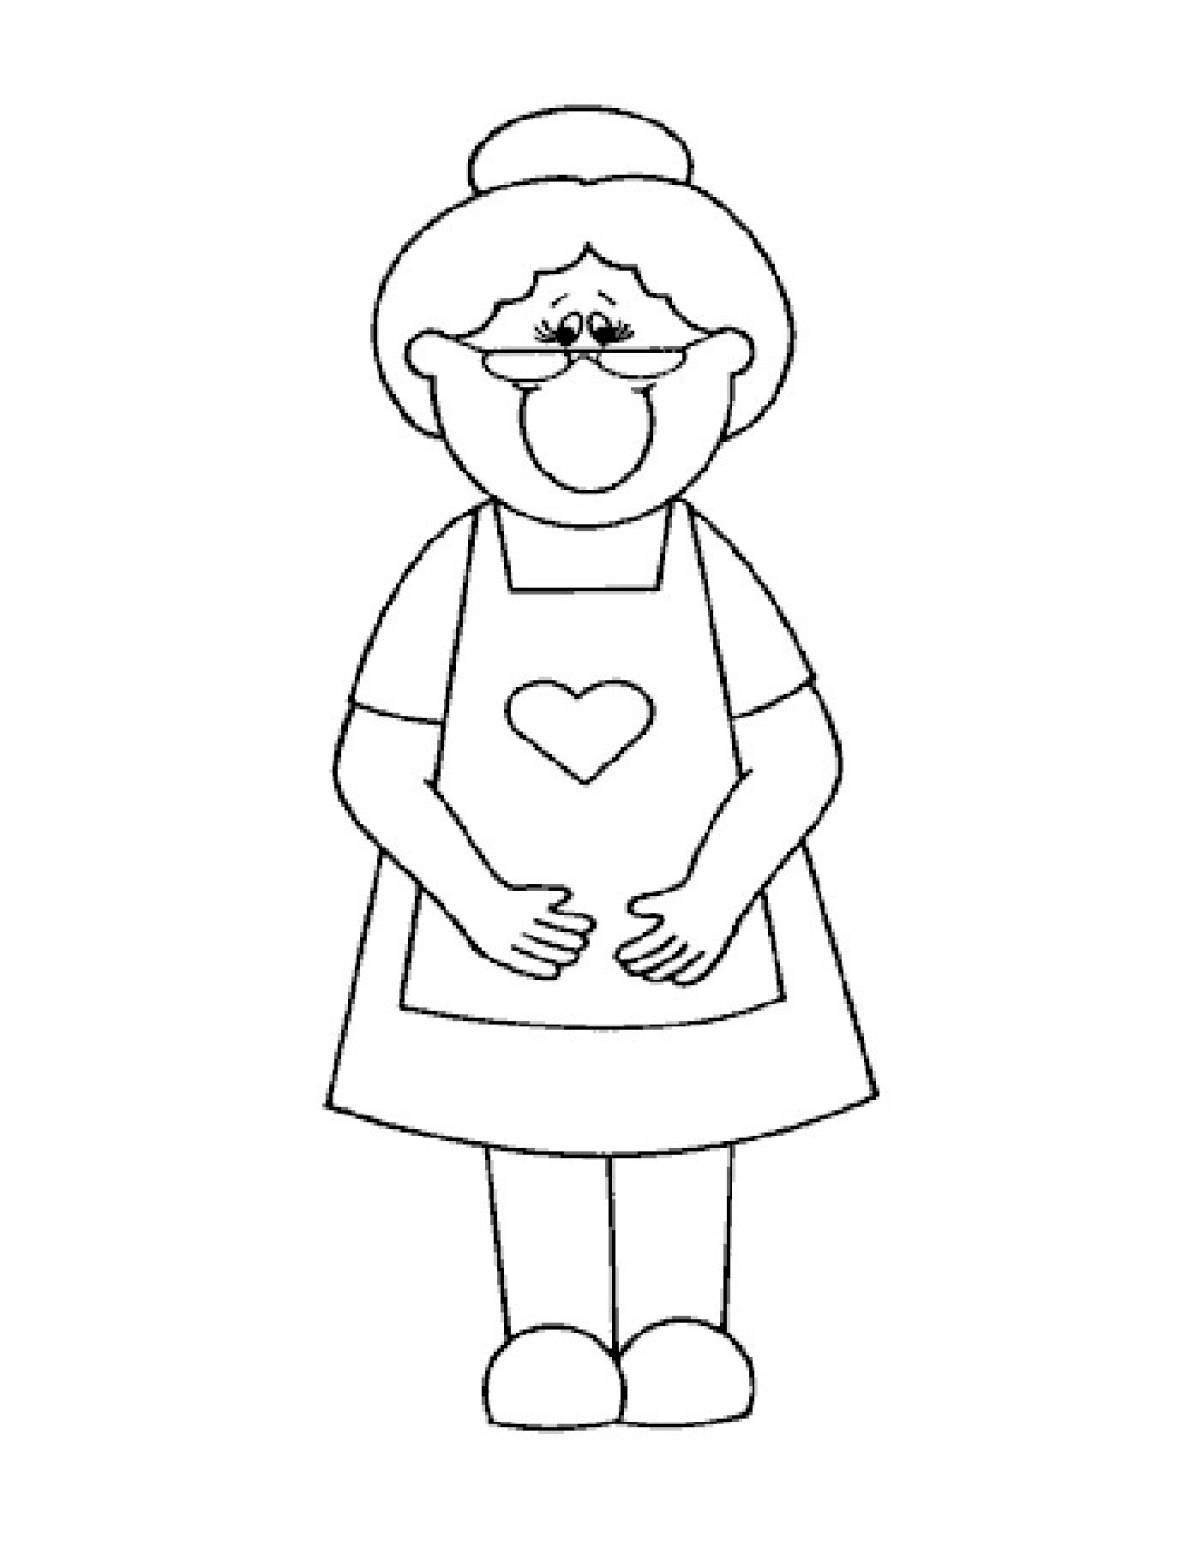 Grandmother in an apron